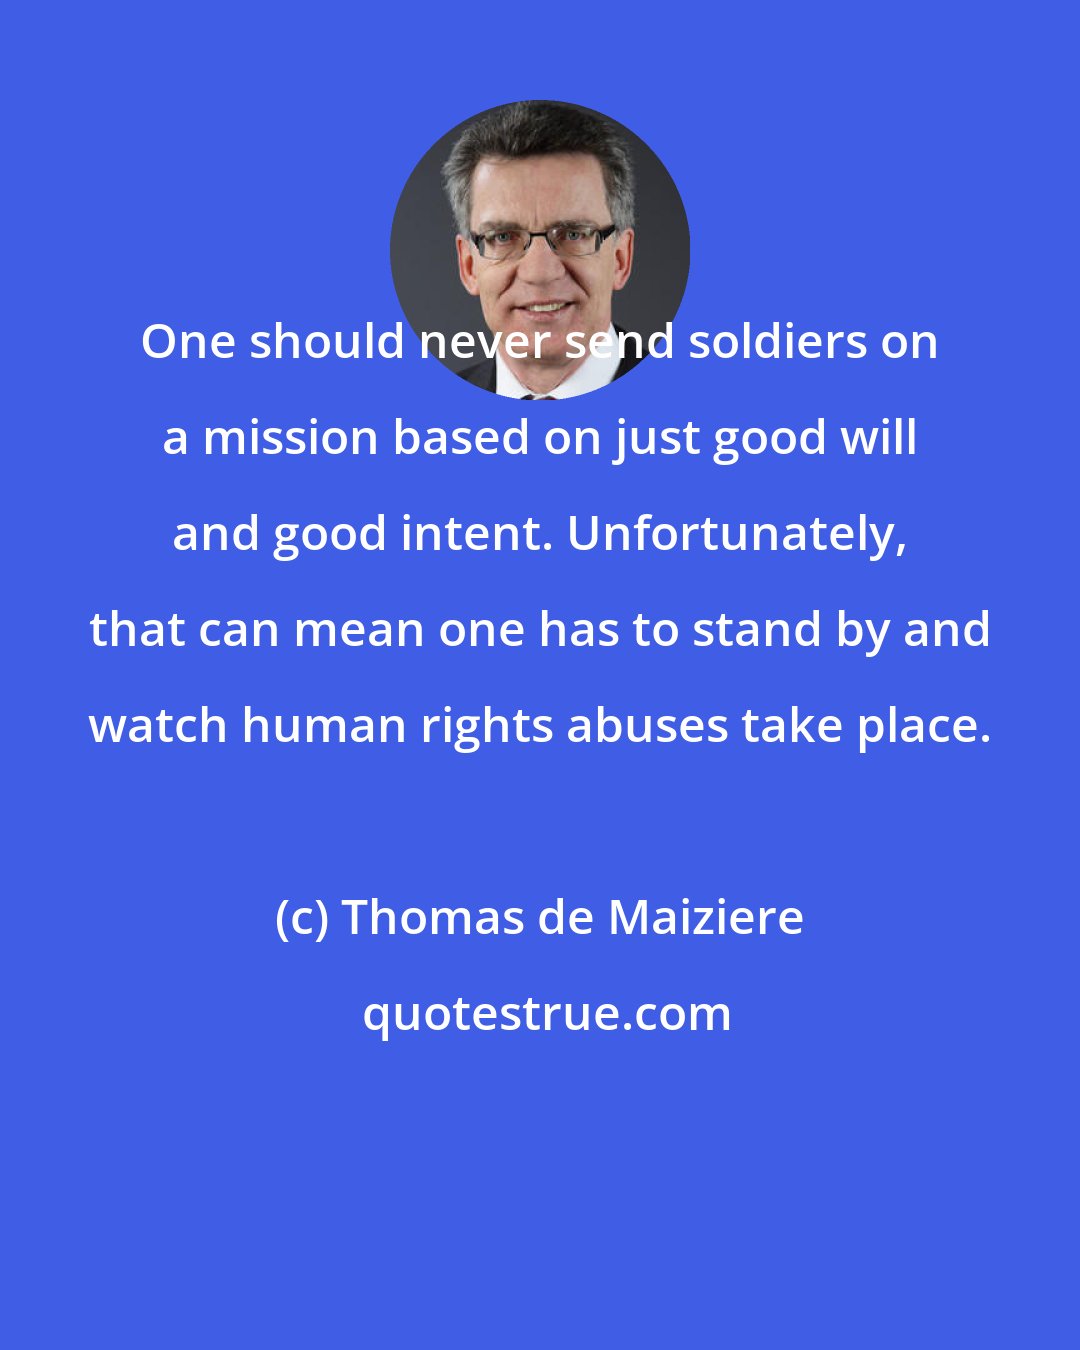 Thomas de Maiziere: One should never send soldiers on a mission based on just good will and good intent. Unfortunately, that can mean one has to stand by and watch human rights abuses take place.